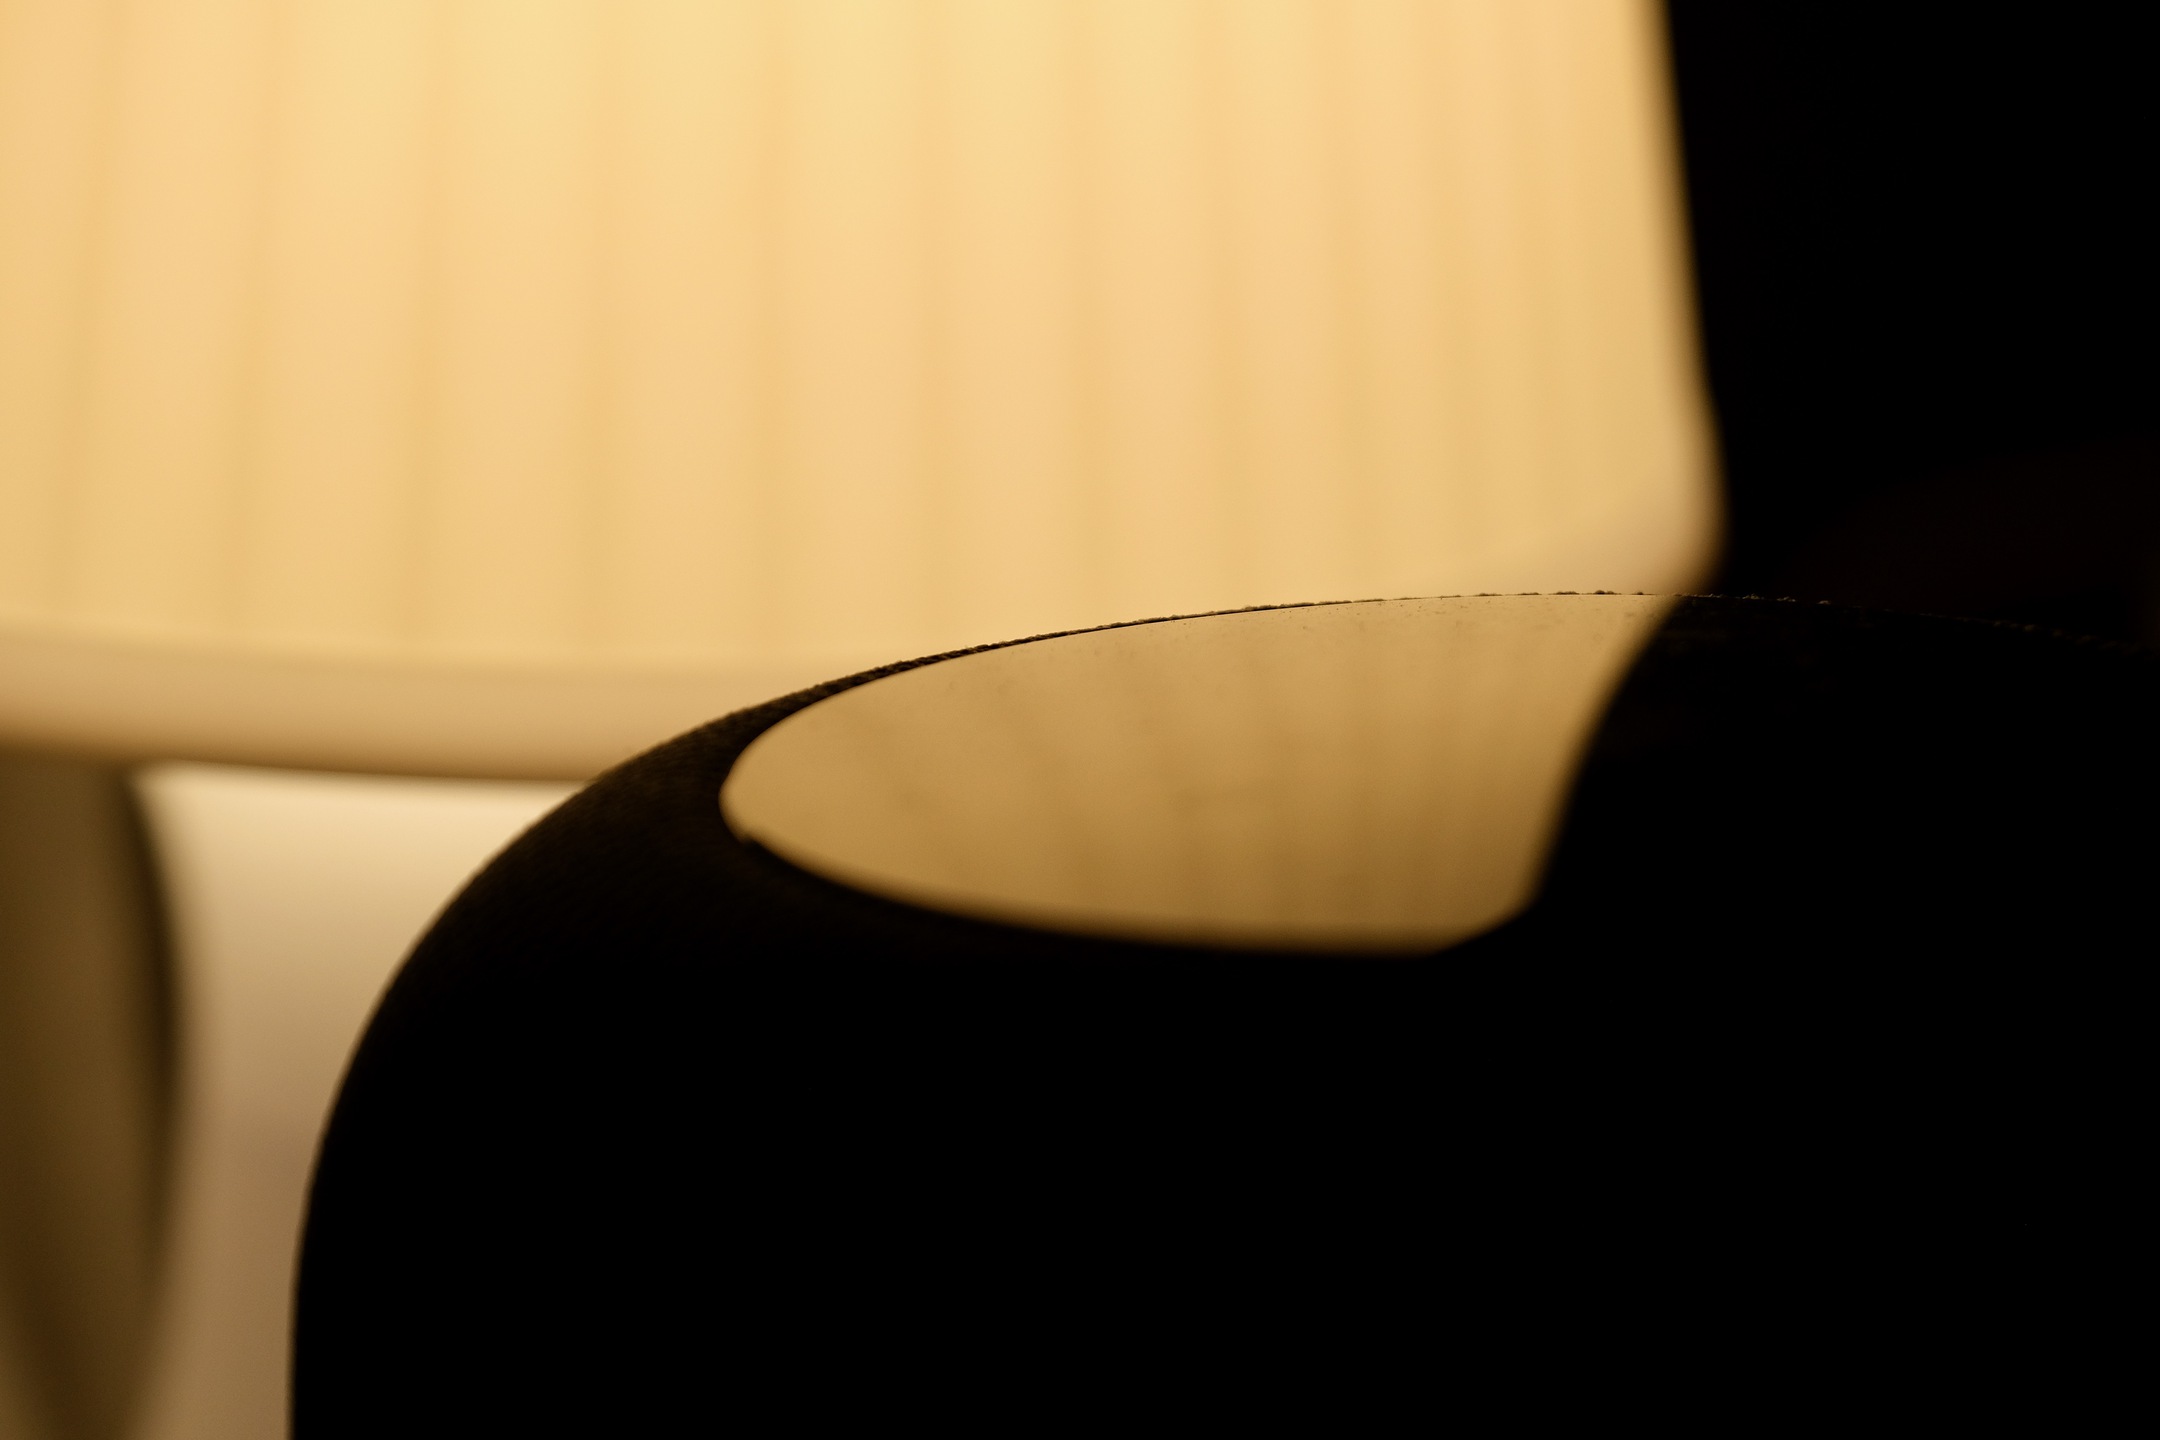 A cover image showing alight from a lamp reflecting off of a smooth surface.